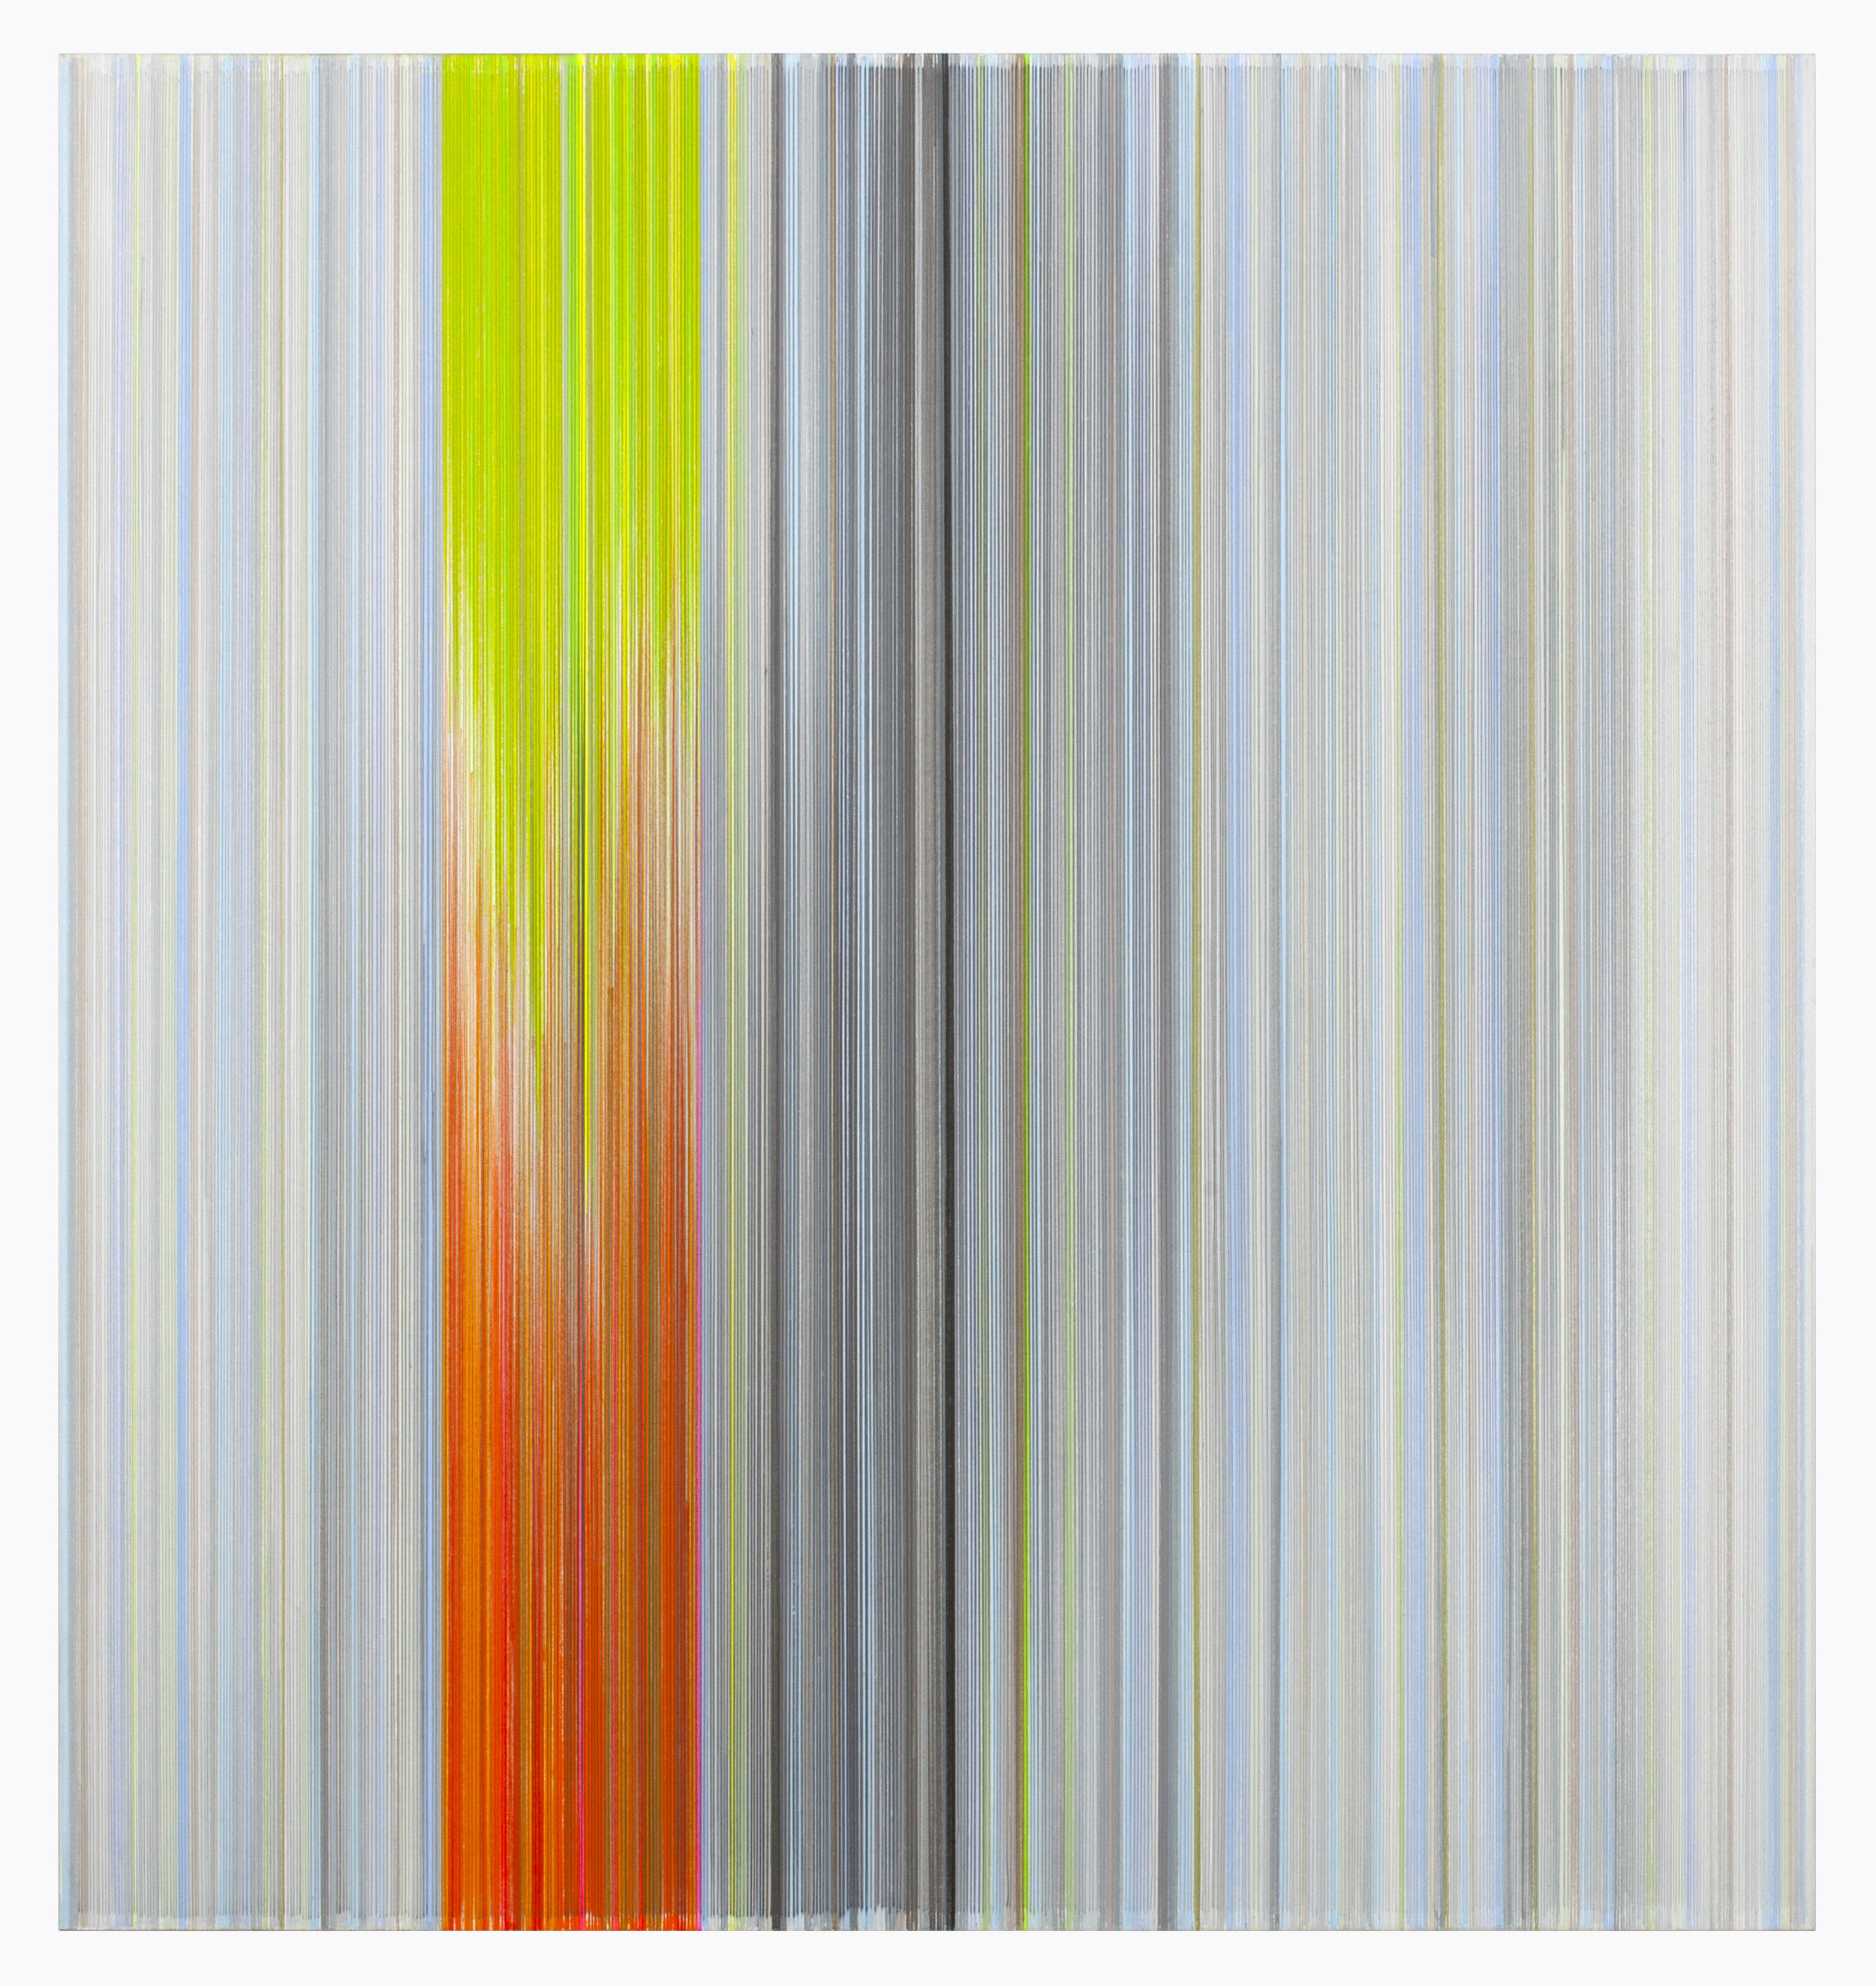    flash: opposites   2020 graphite and colored pencil on mat board 30 x 28 inches 